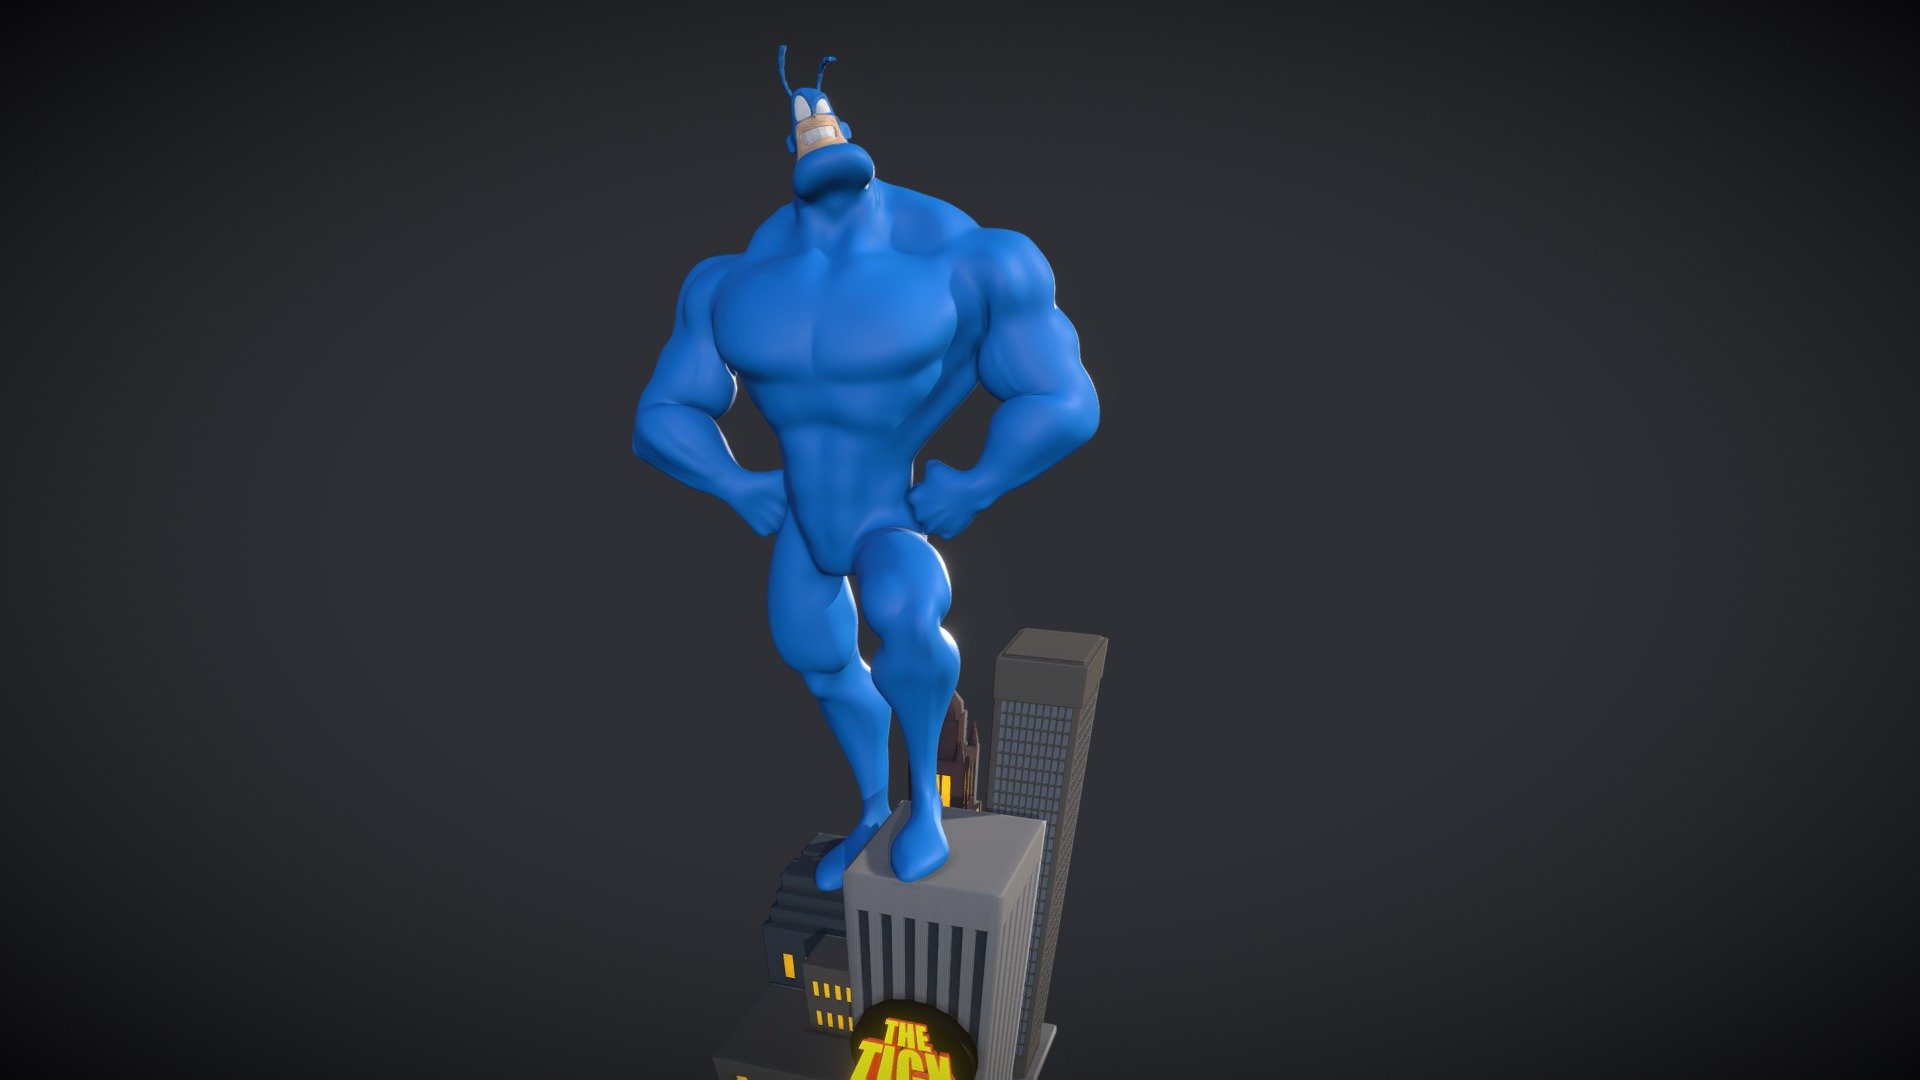 ArtStation - The Tick Animated Series - Sketchfab Collection